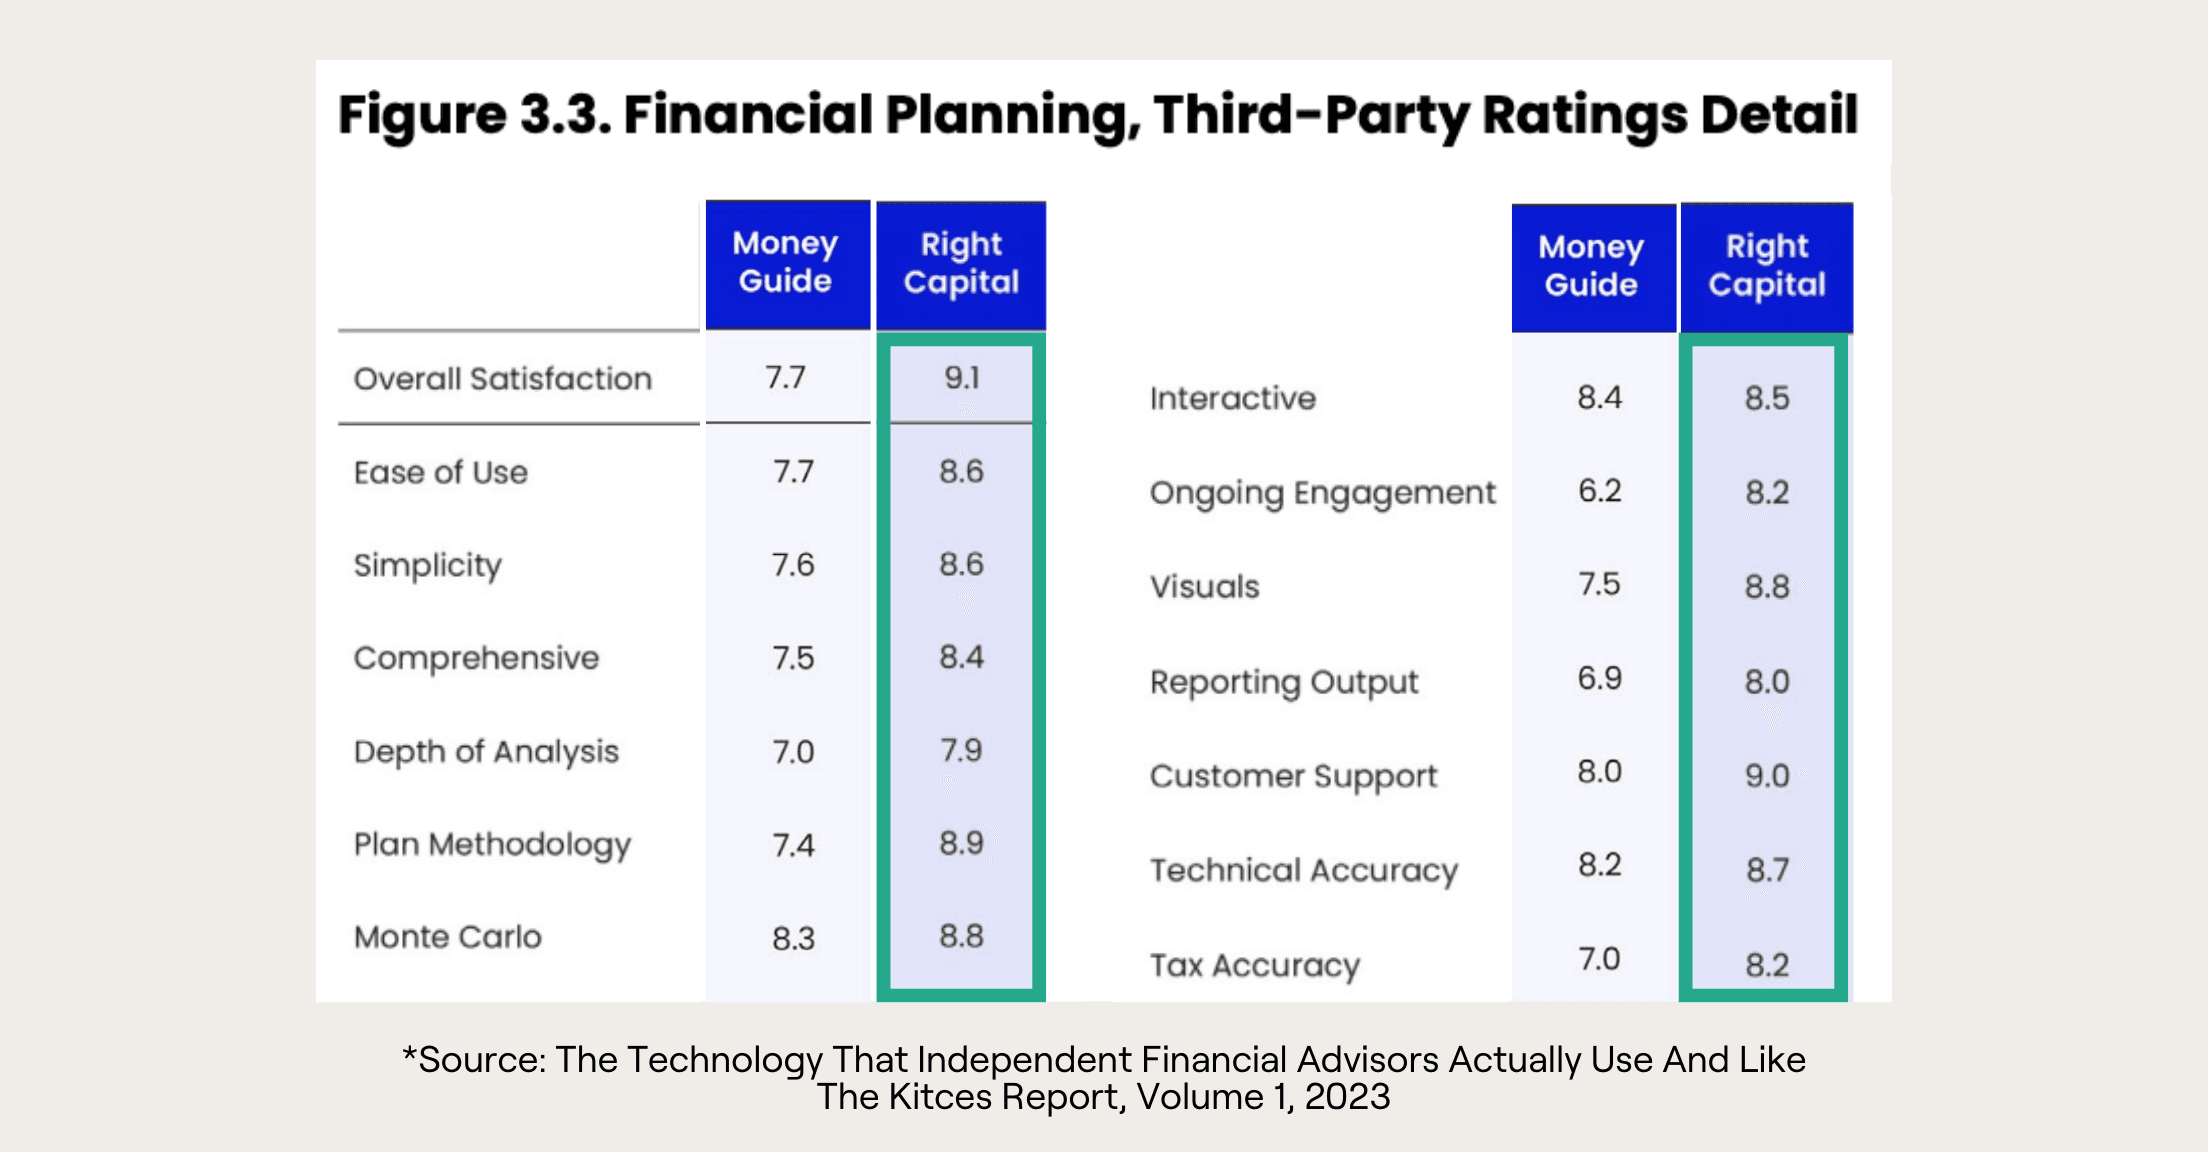 Chart from "The Technology That Independent Financial Advisors Actually Use And Like", The Kitces Report, Volume 1, 2023 showing comparisons between RightCapital and MoneyGuide